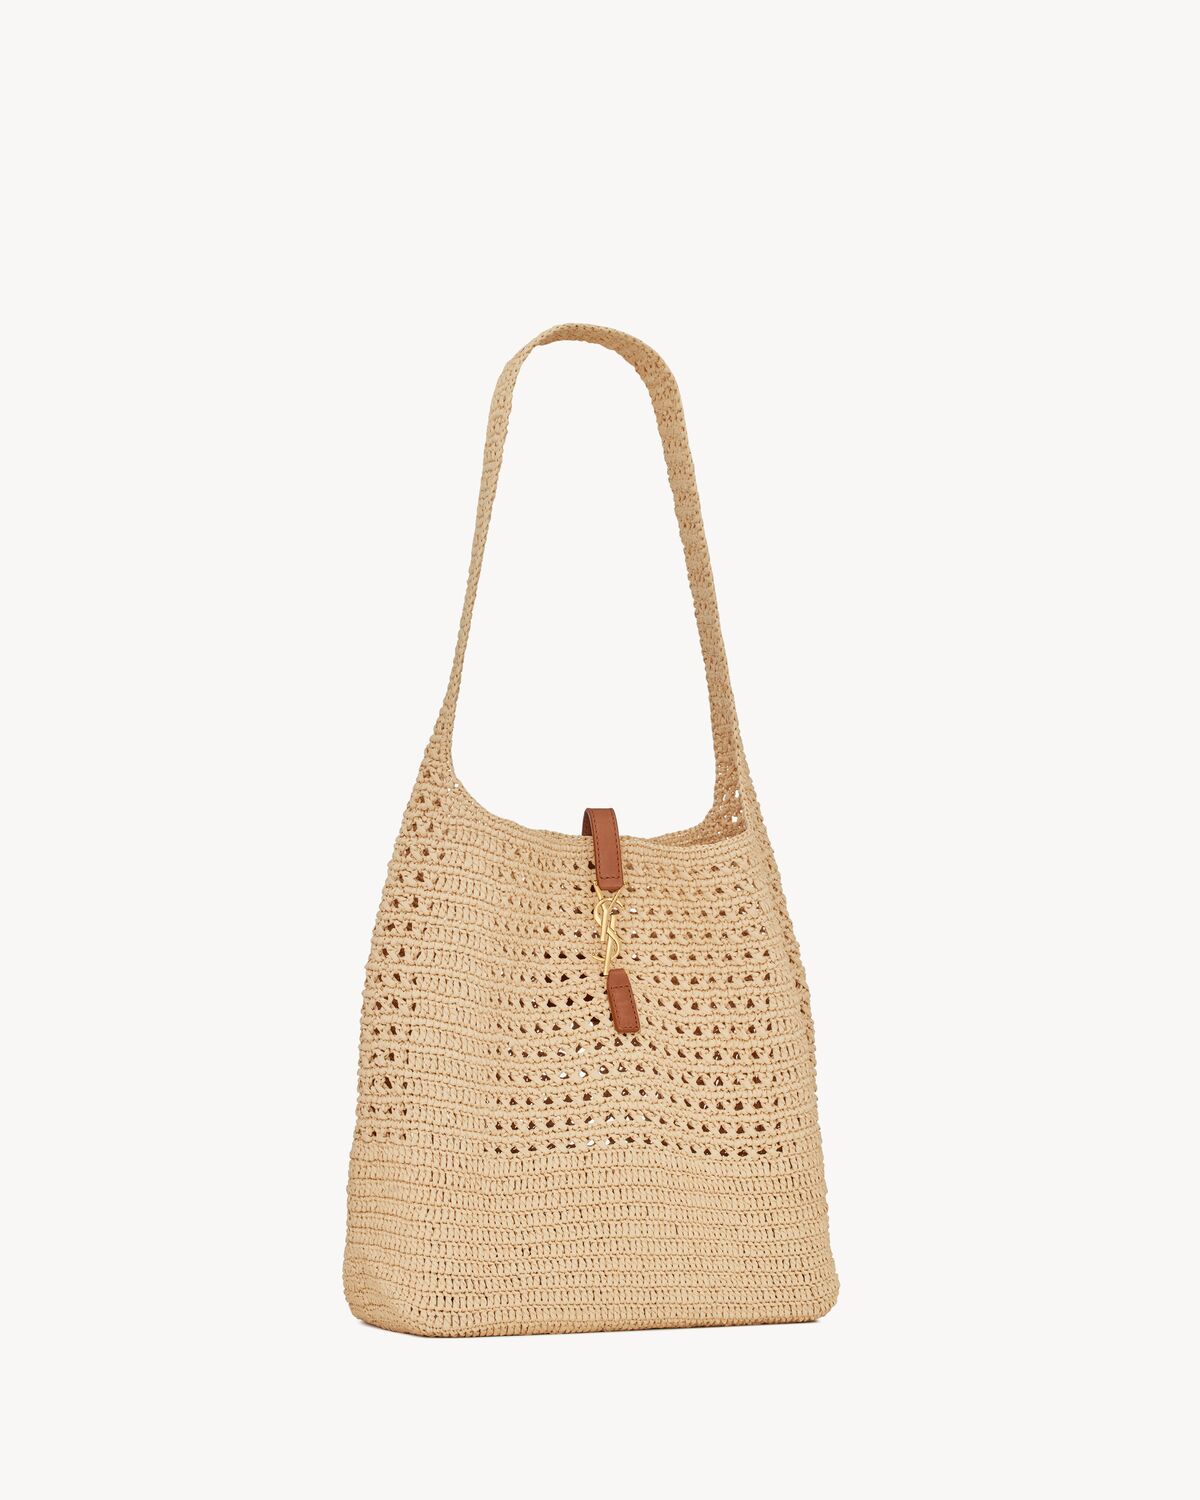 LE 5 A 7 in raffia crochet and smooth leather